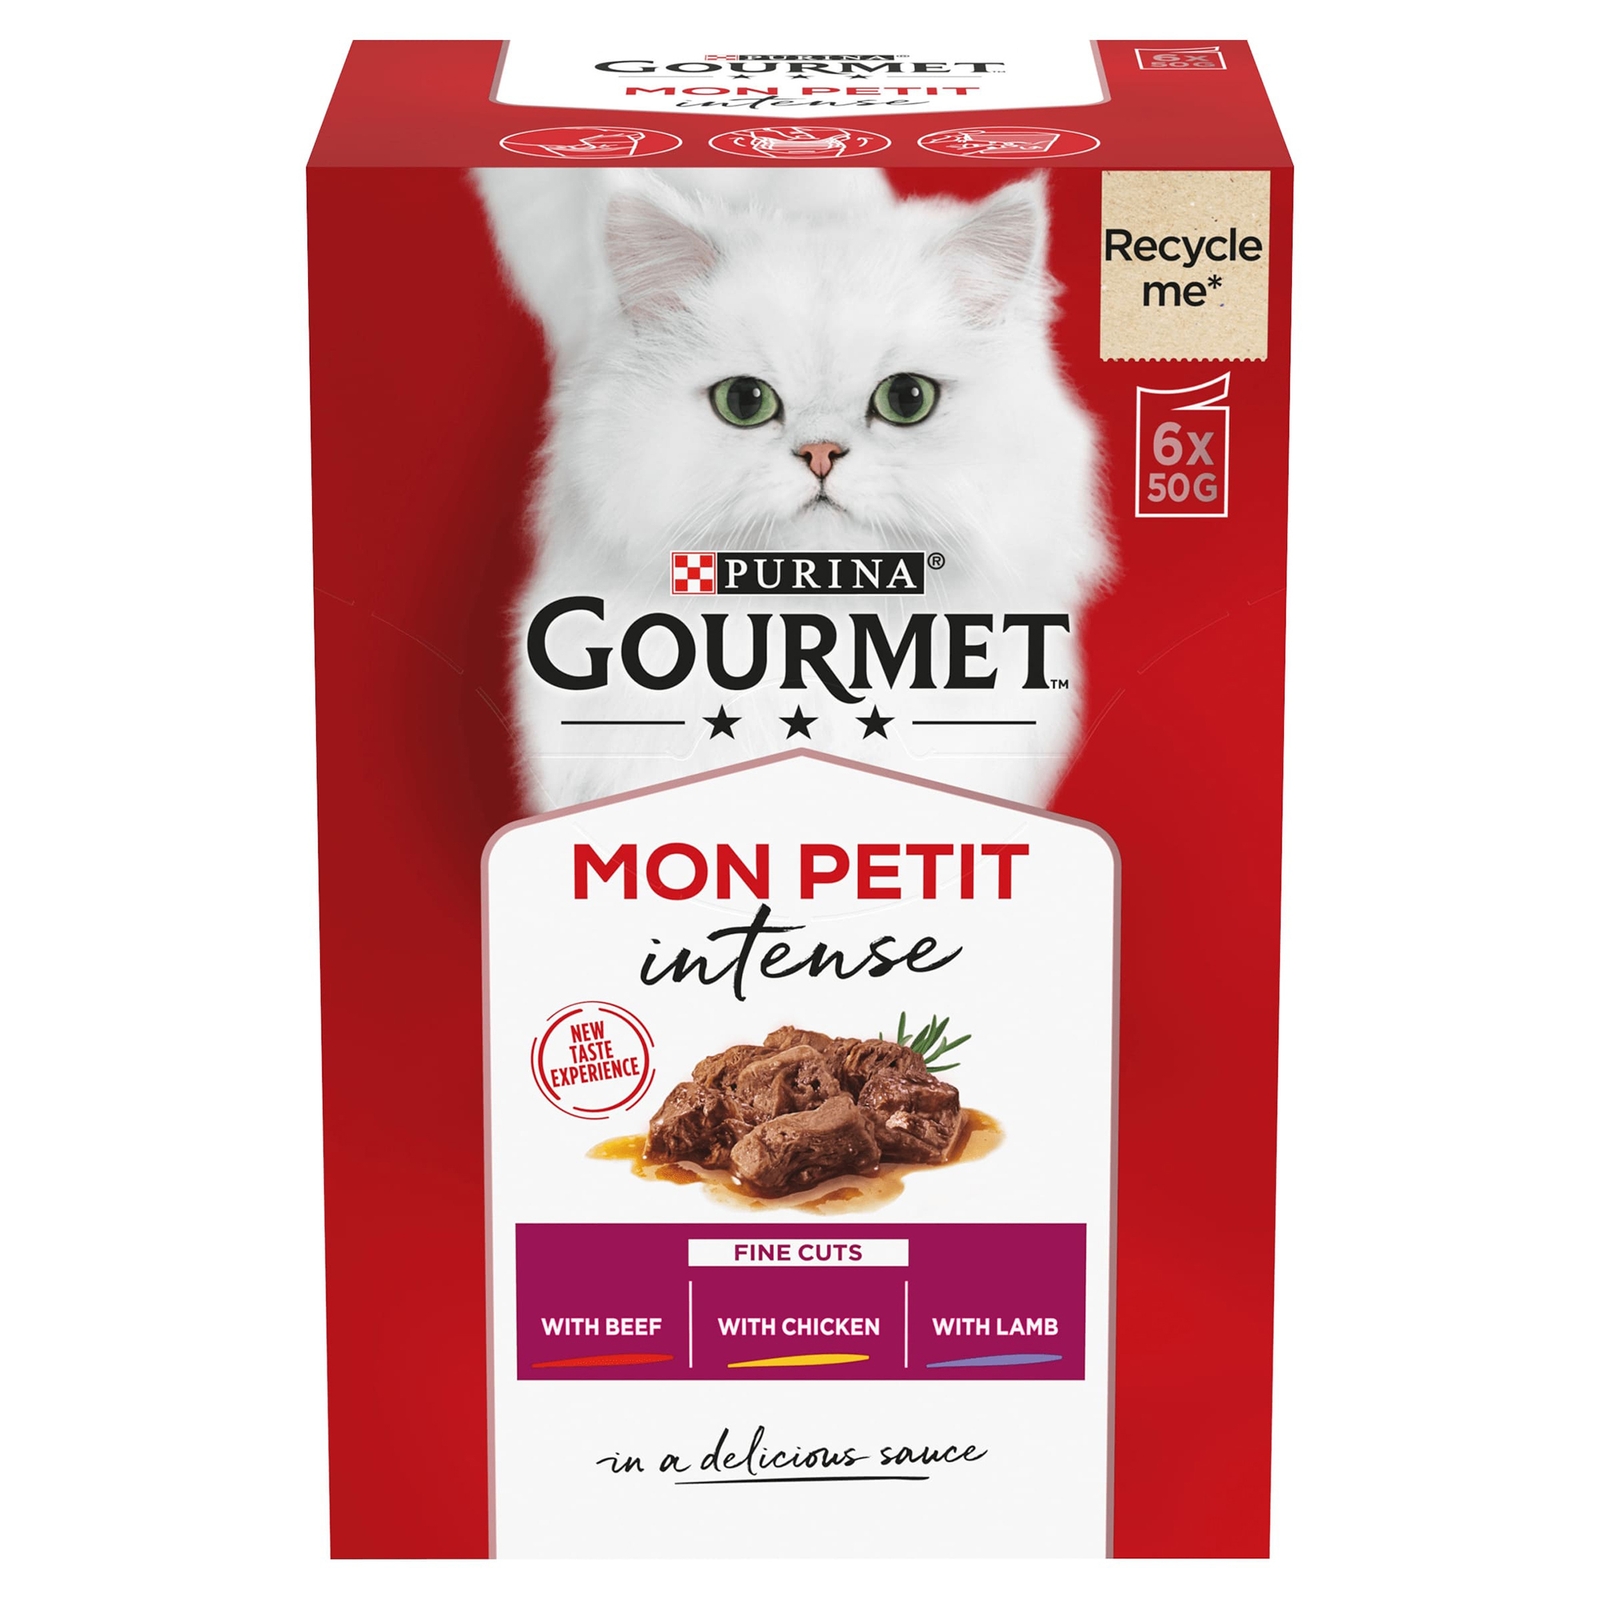 Image of Gourmet Mon Petit Meaty Variety with Beef, Chicken & Lamb Adult Wet Cat Food 6x50g